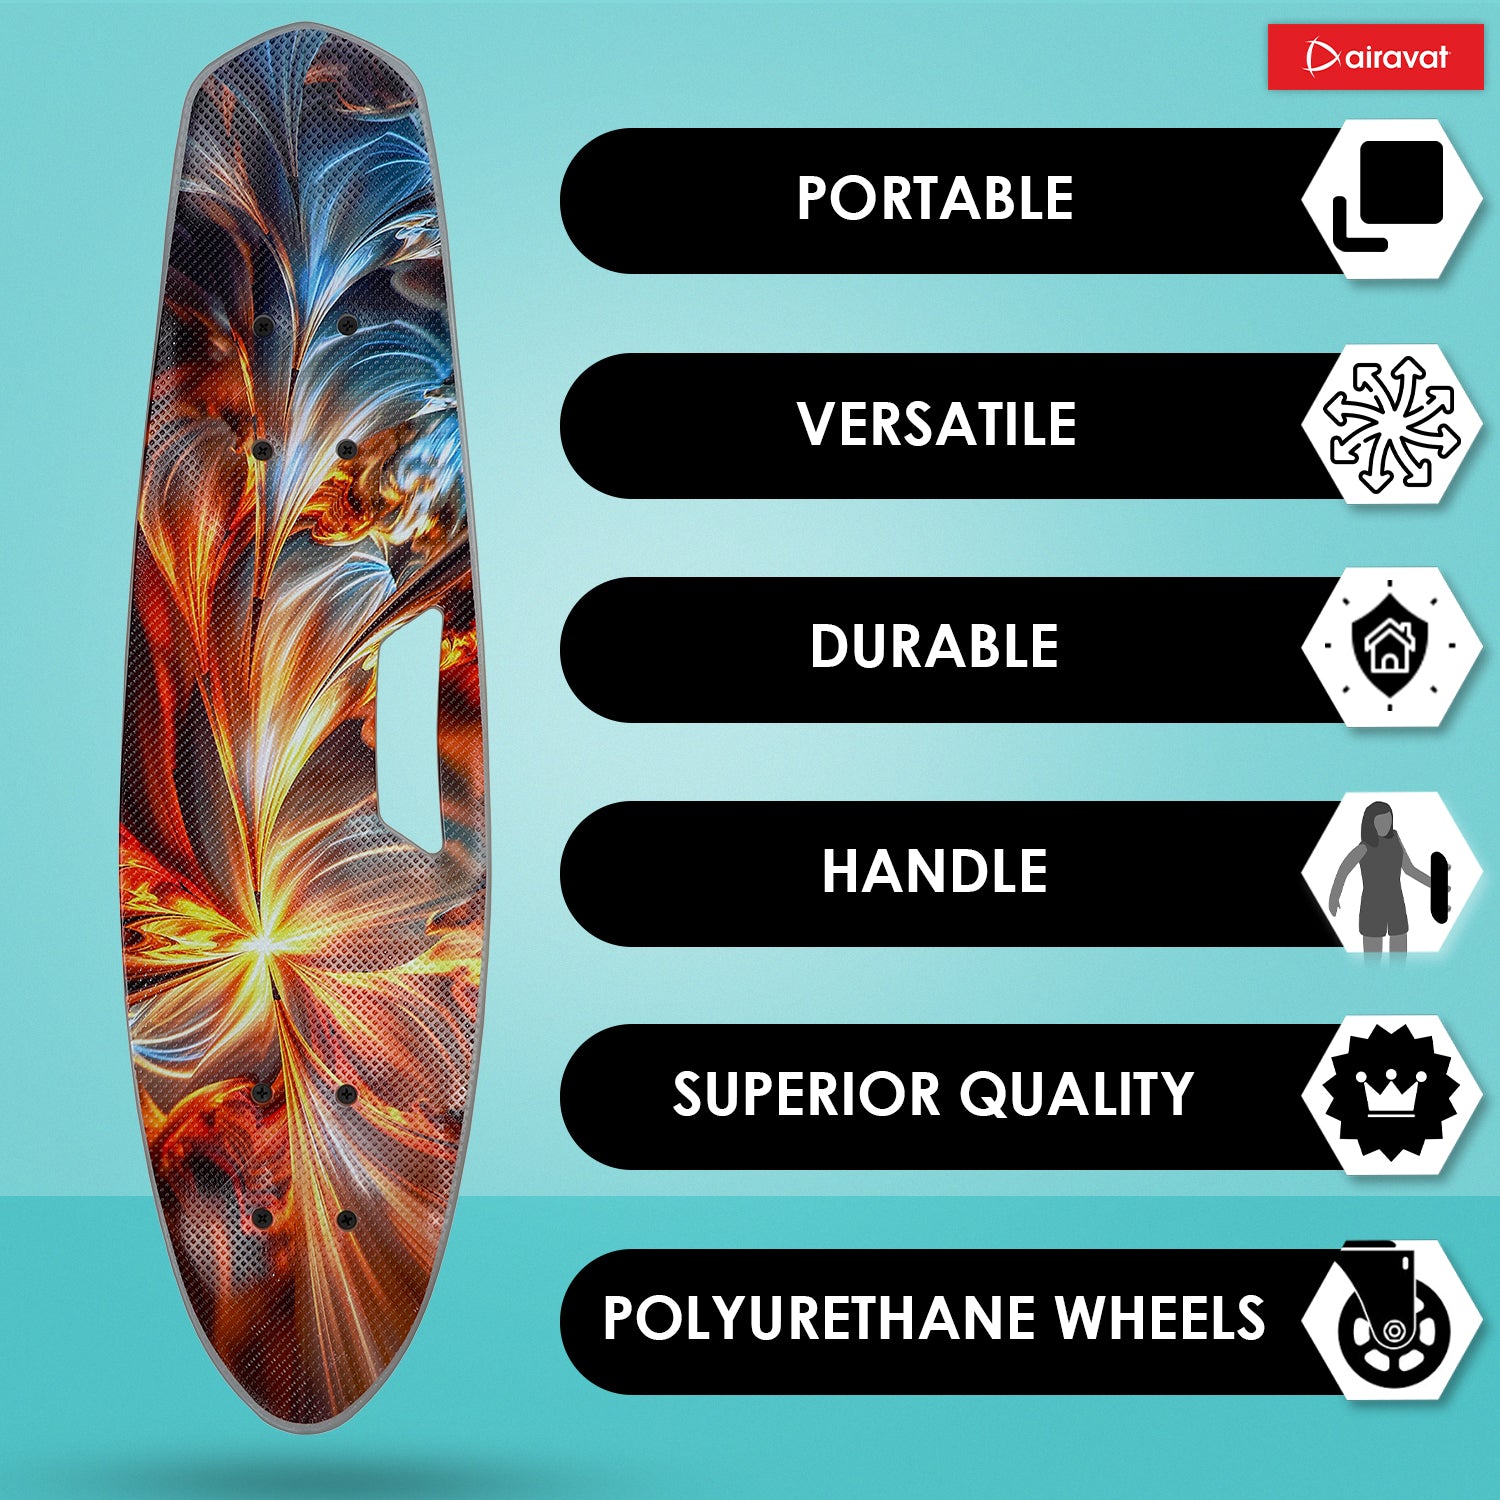 7818-skateboard-style1-more-features